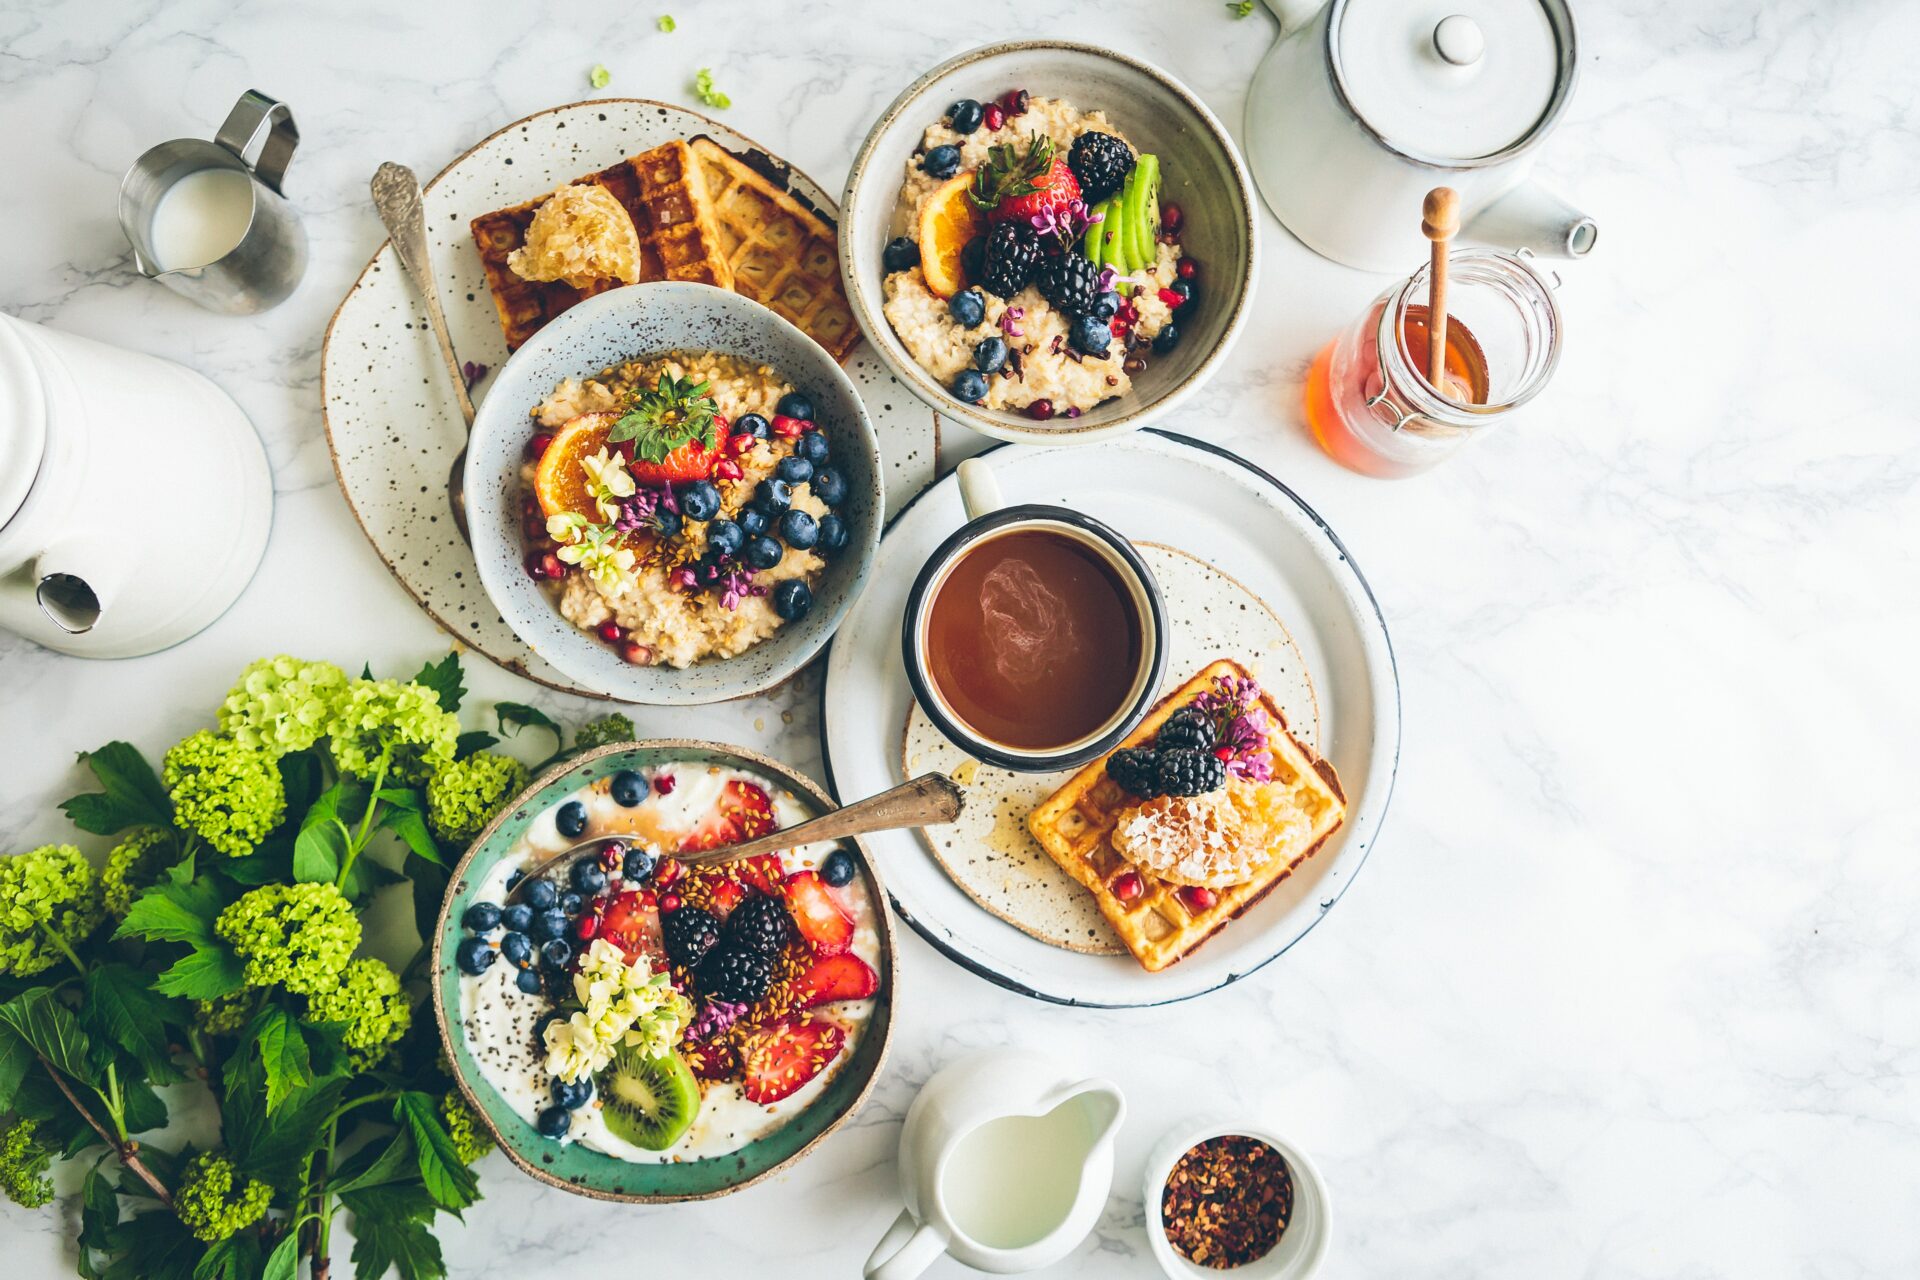 Oatmeal, waffles, fruits, and other popular brunch items.